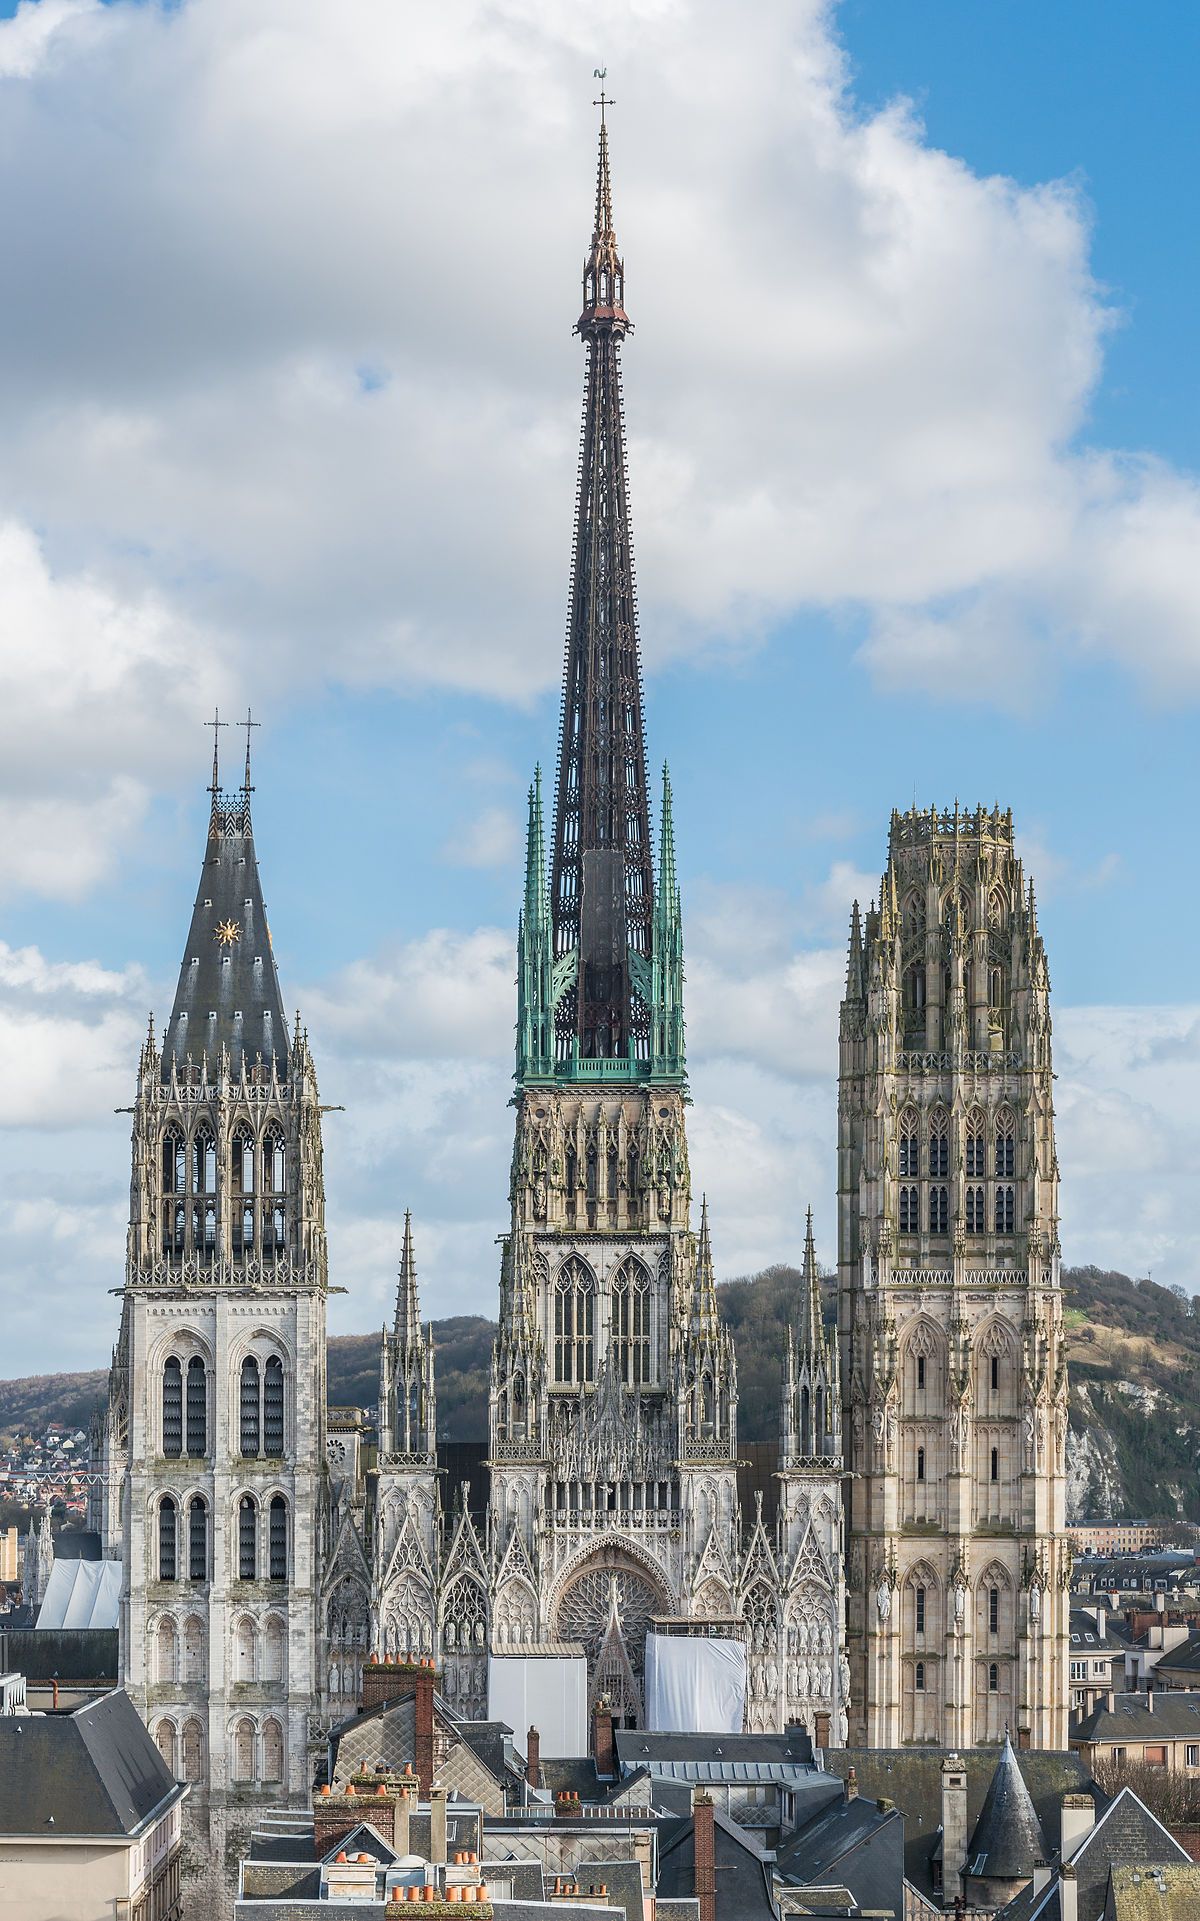 Rouen Cathedral - Wikipedia | Europe 2018 | Pinterest | Cathedrals ...